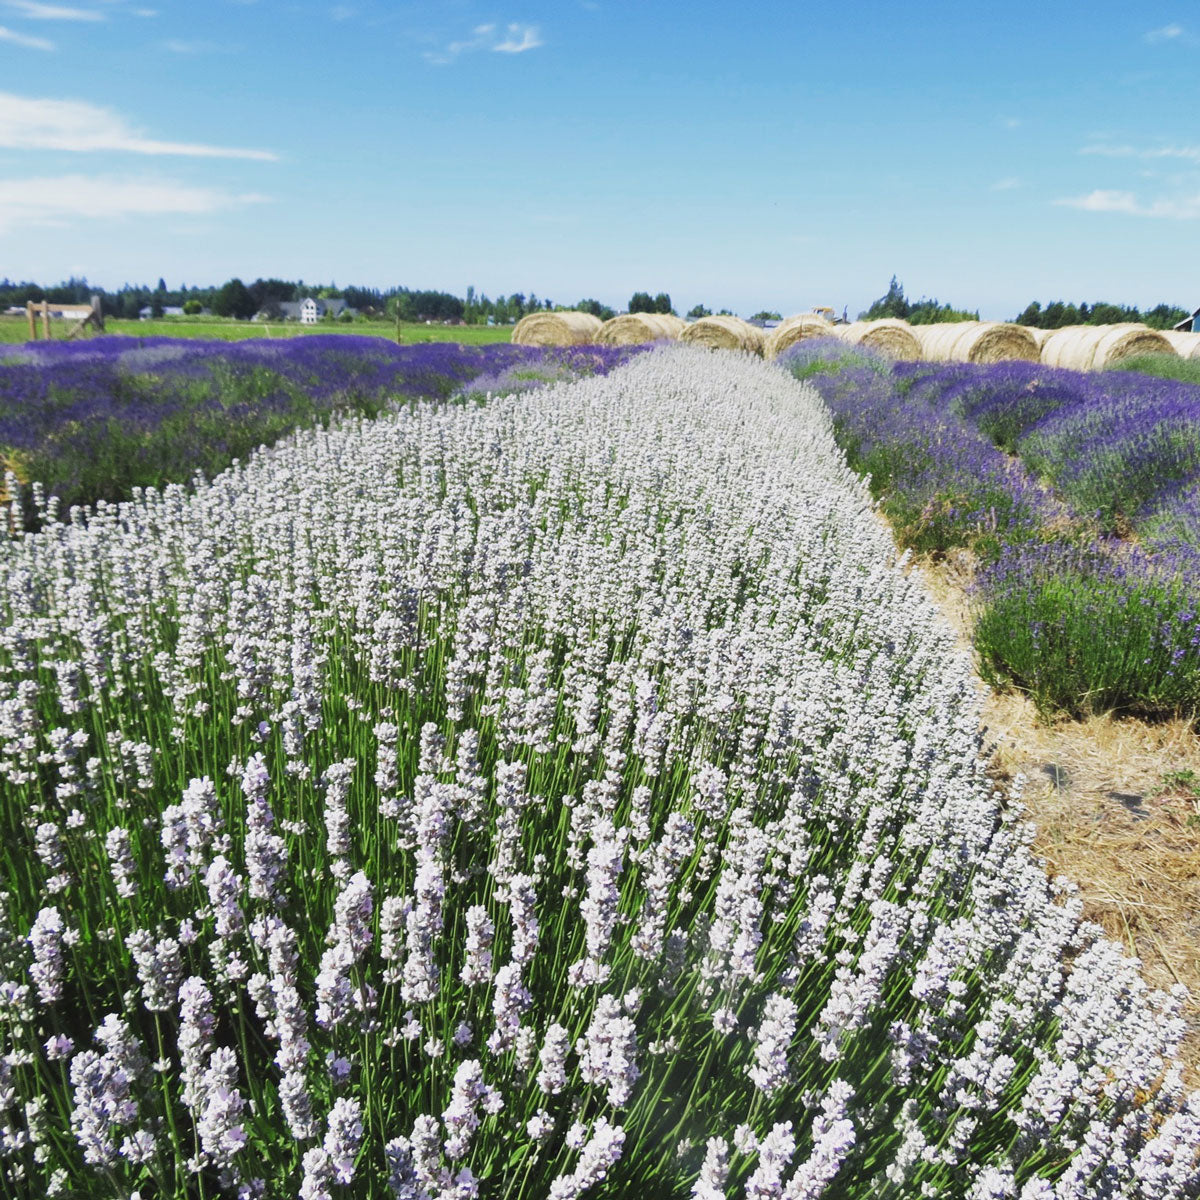 Meet our Local Supplier: Victor's Lavender